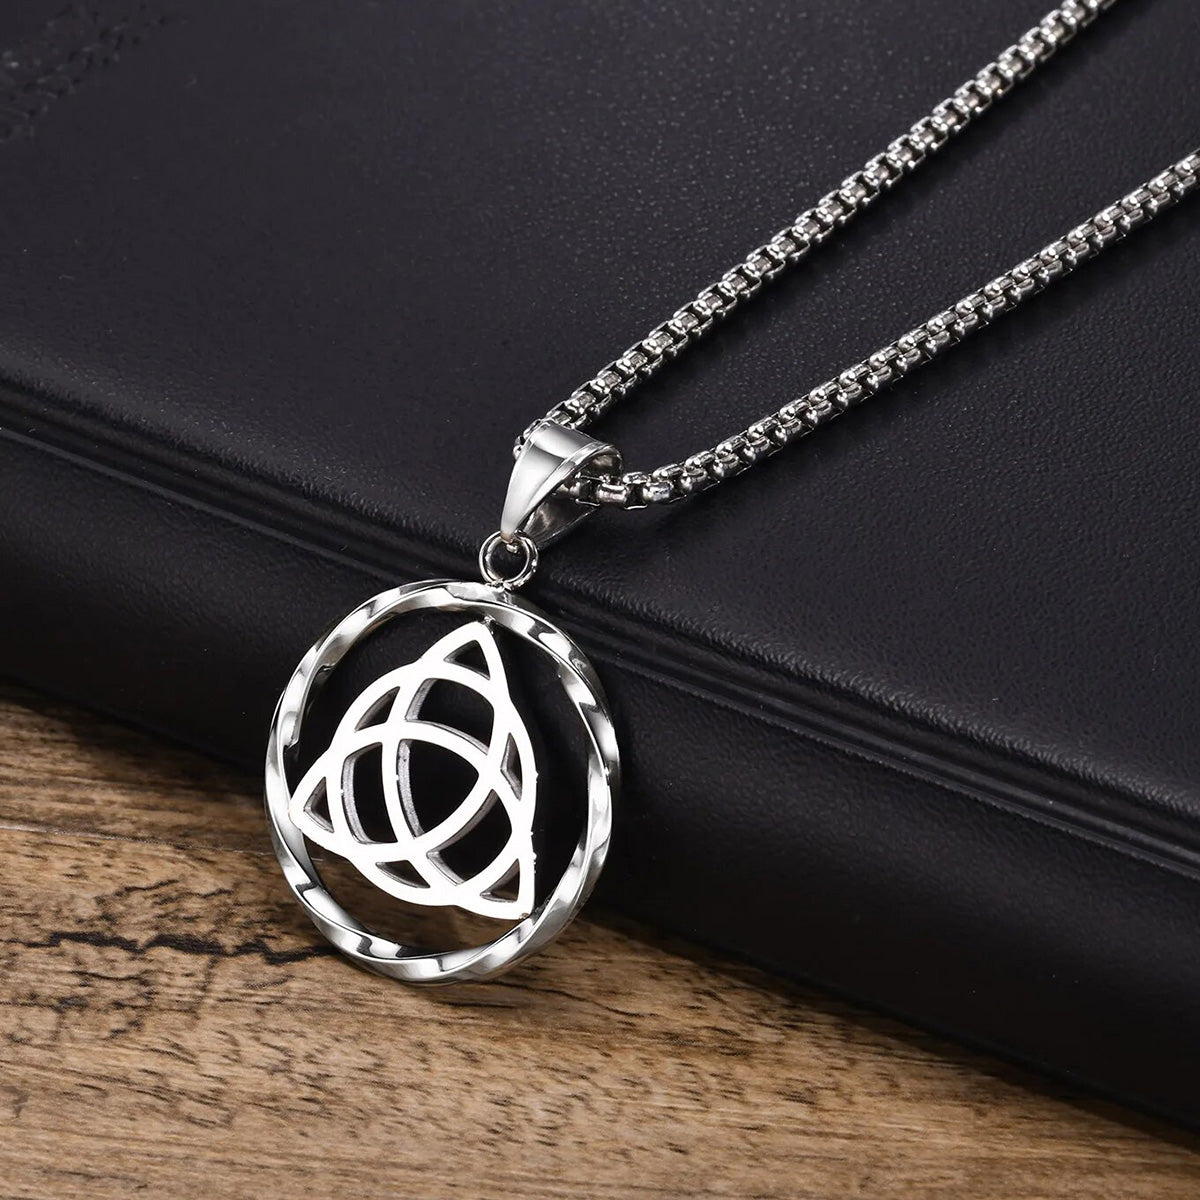 Viking - Norse Viking Necklaces for Men Women, Stainless Steel Round Hollow Knot Pendant Collar Jewelry